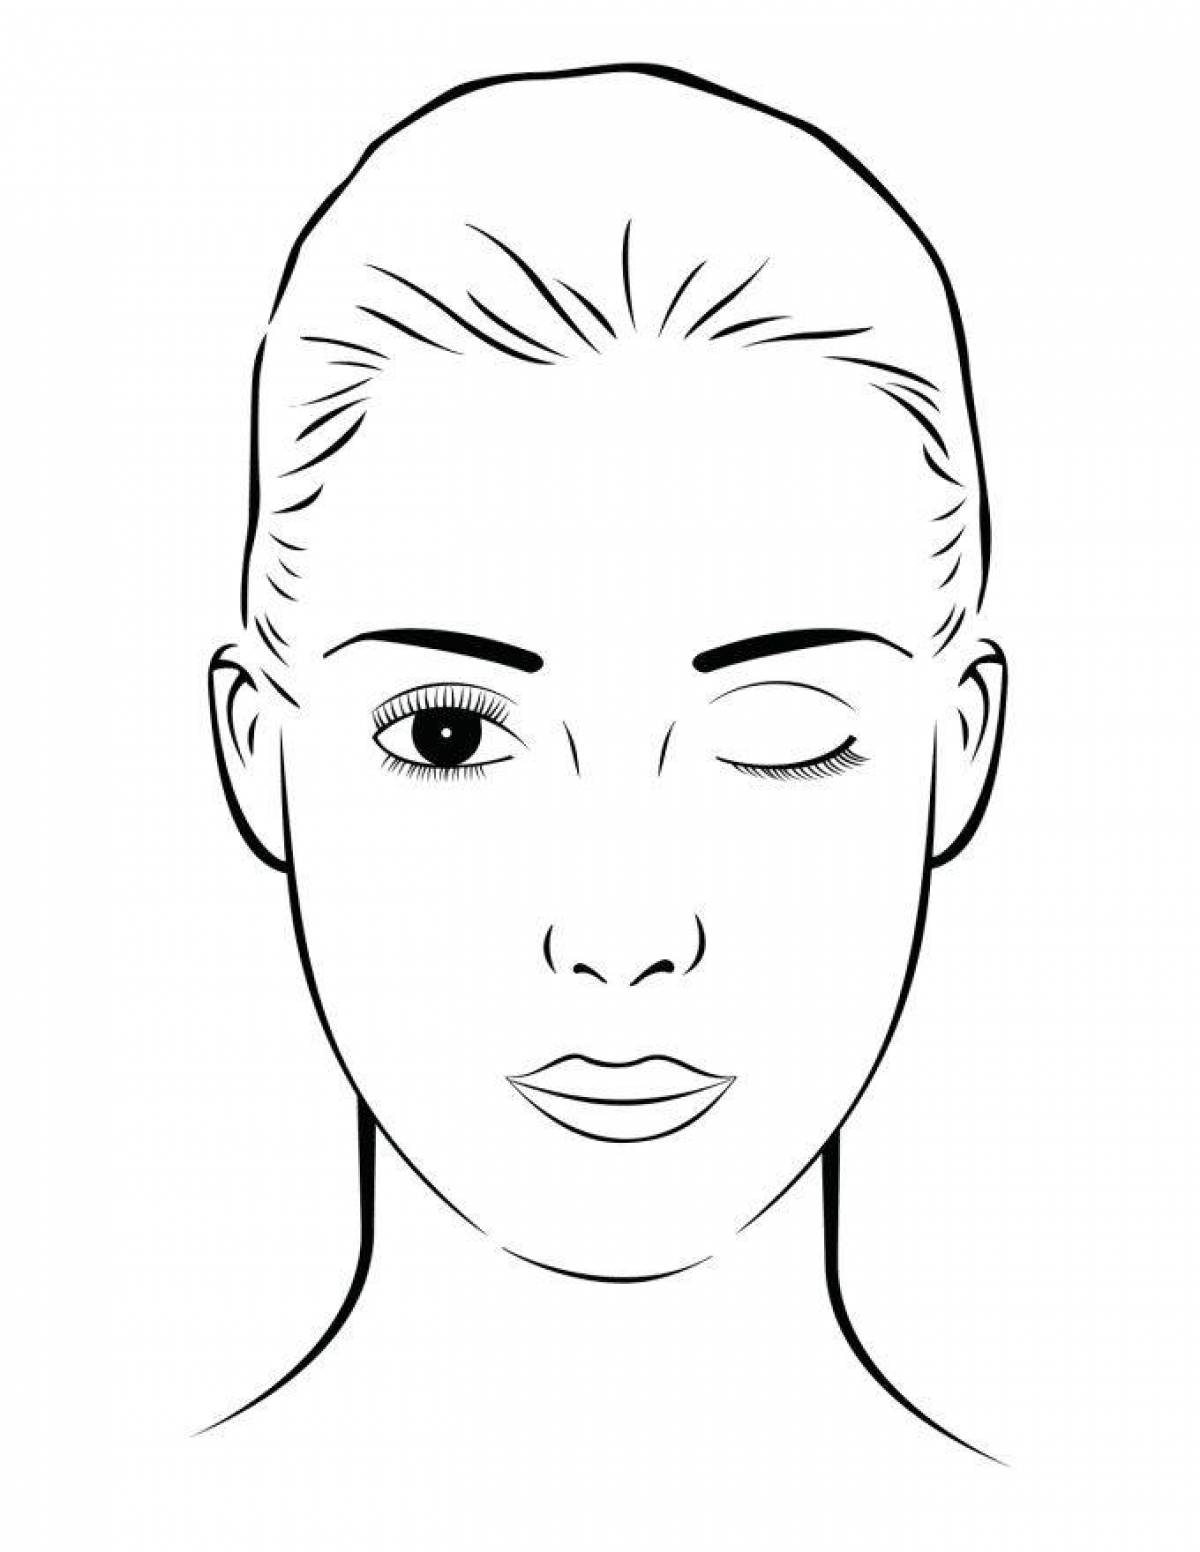 Coloring page of face with glowing makeup